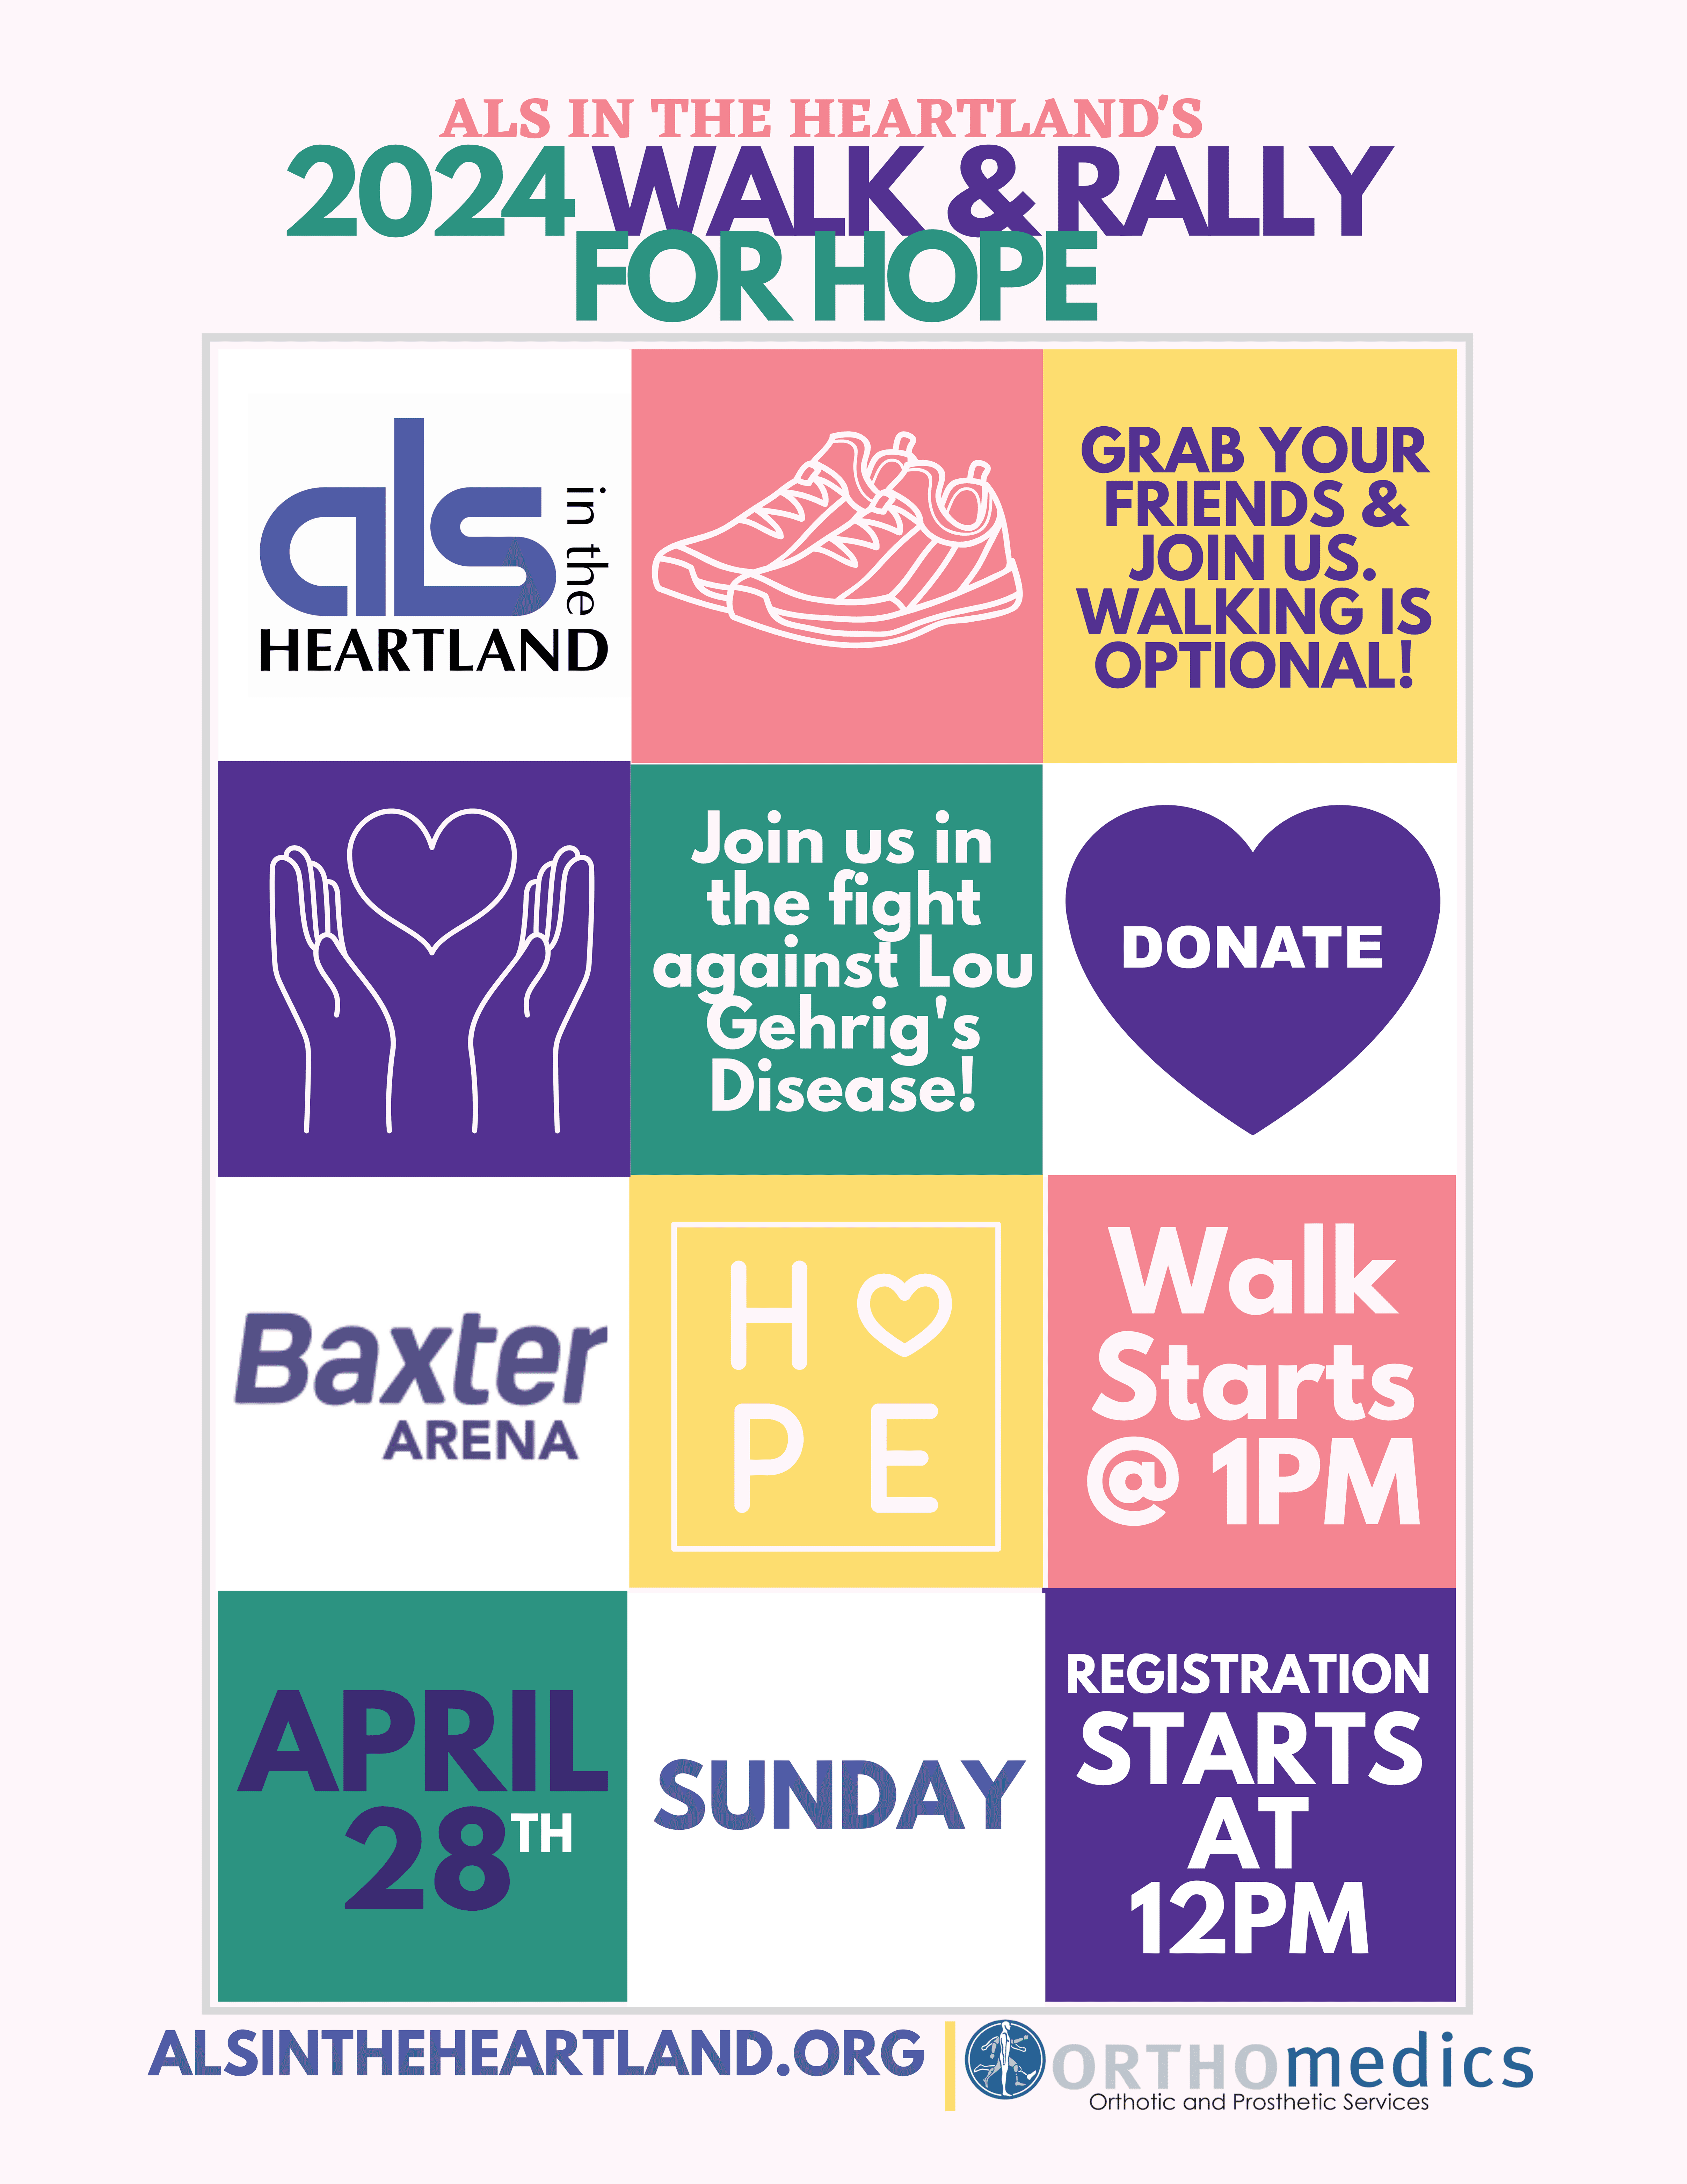 Join us for the 2024 Walk & Rally for Hope at Baxter Arena.